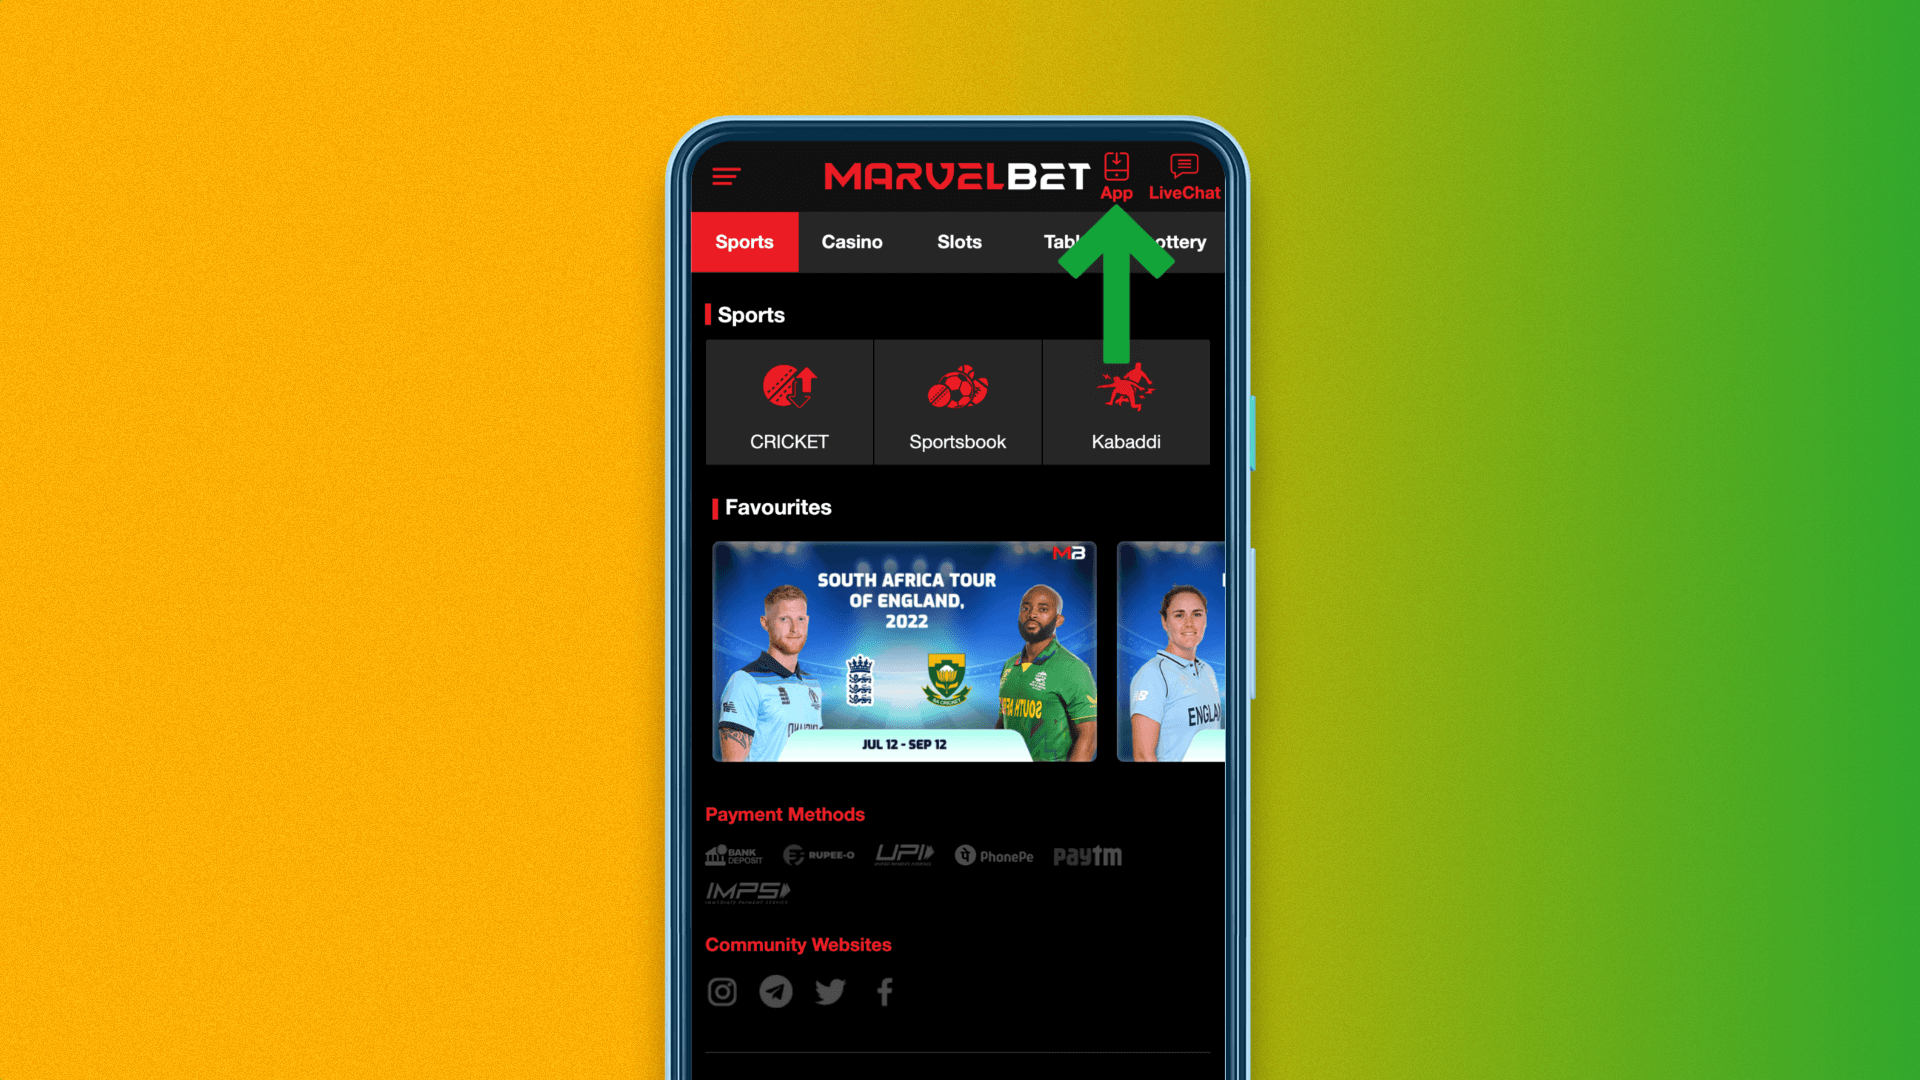 The free Marvelbet mobile app for Android devices